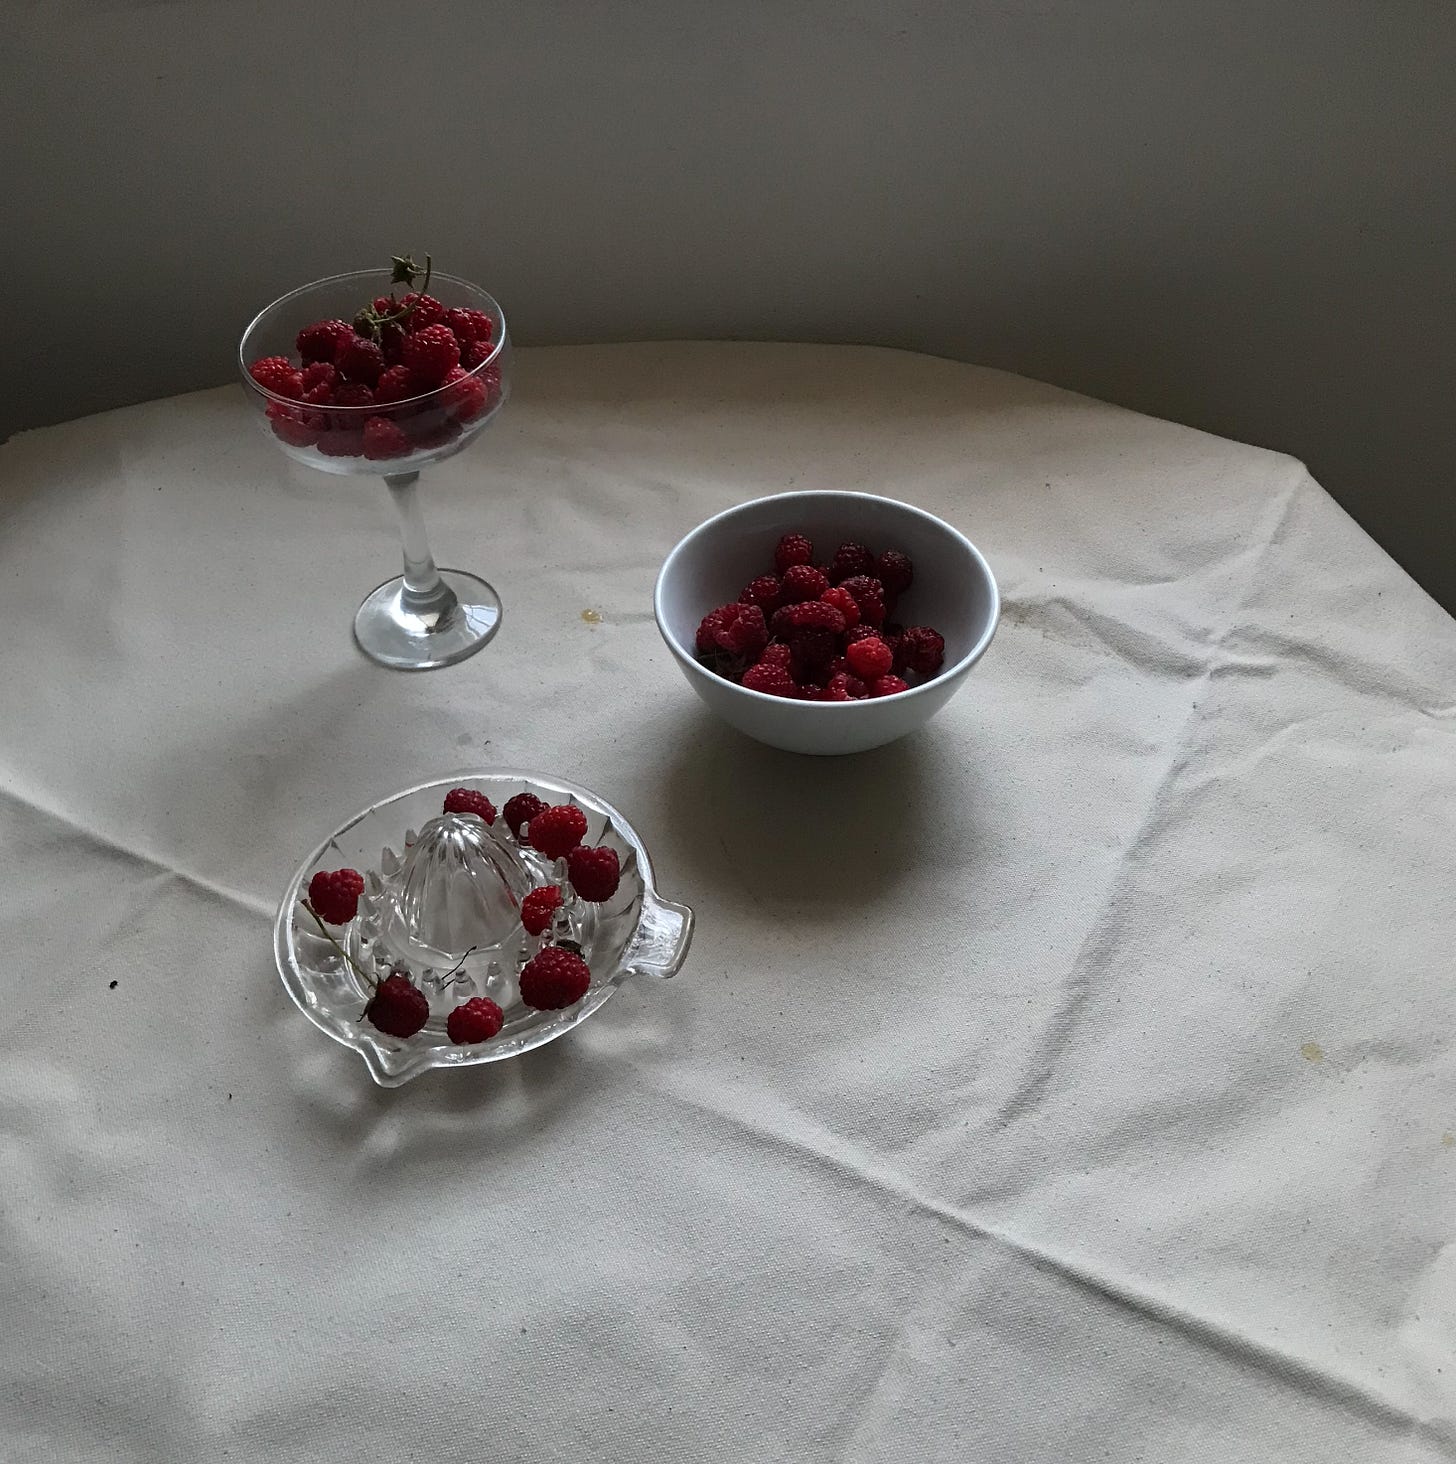 Set atop a piece of canvas, three receptacles filled with dark pink raspberries. One is a glass lemon squeezer, one a glass champagne coupe, and the last a pale white china bowl. 